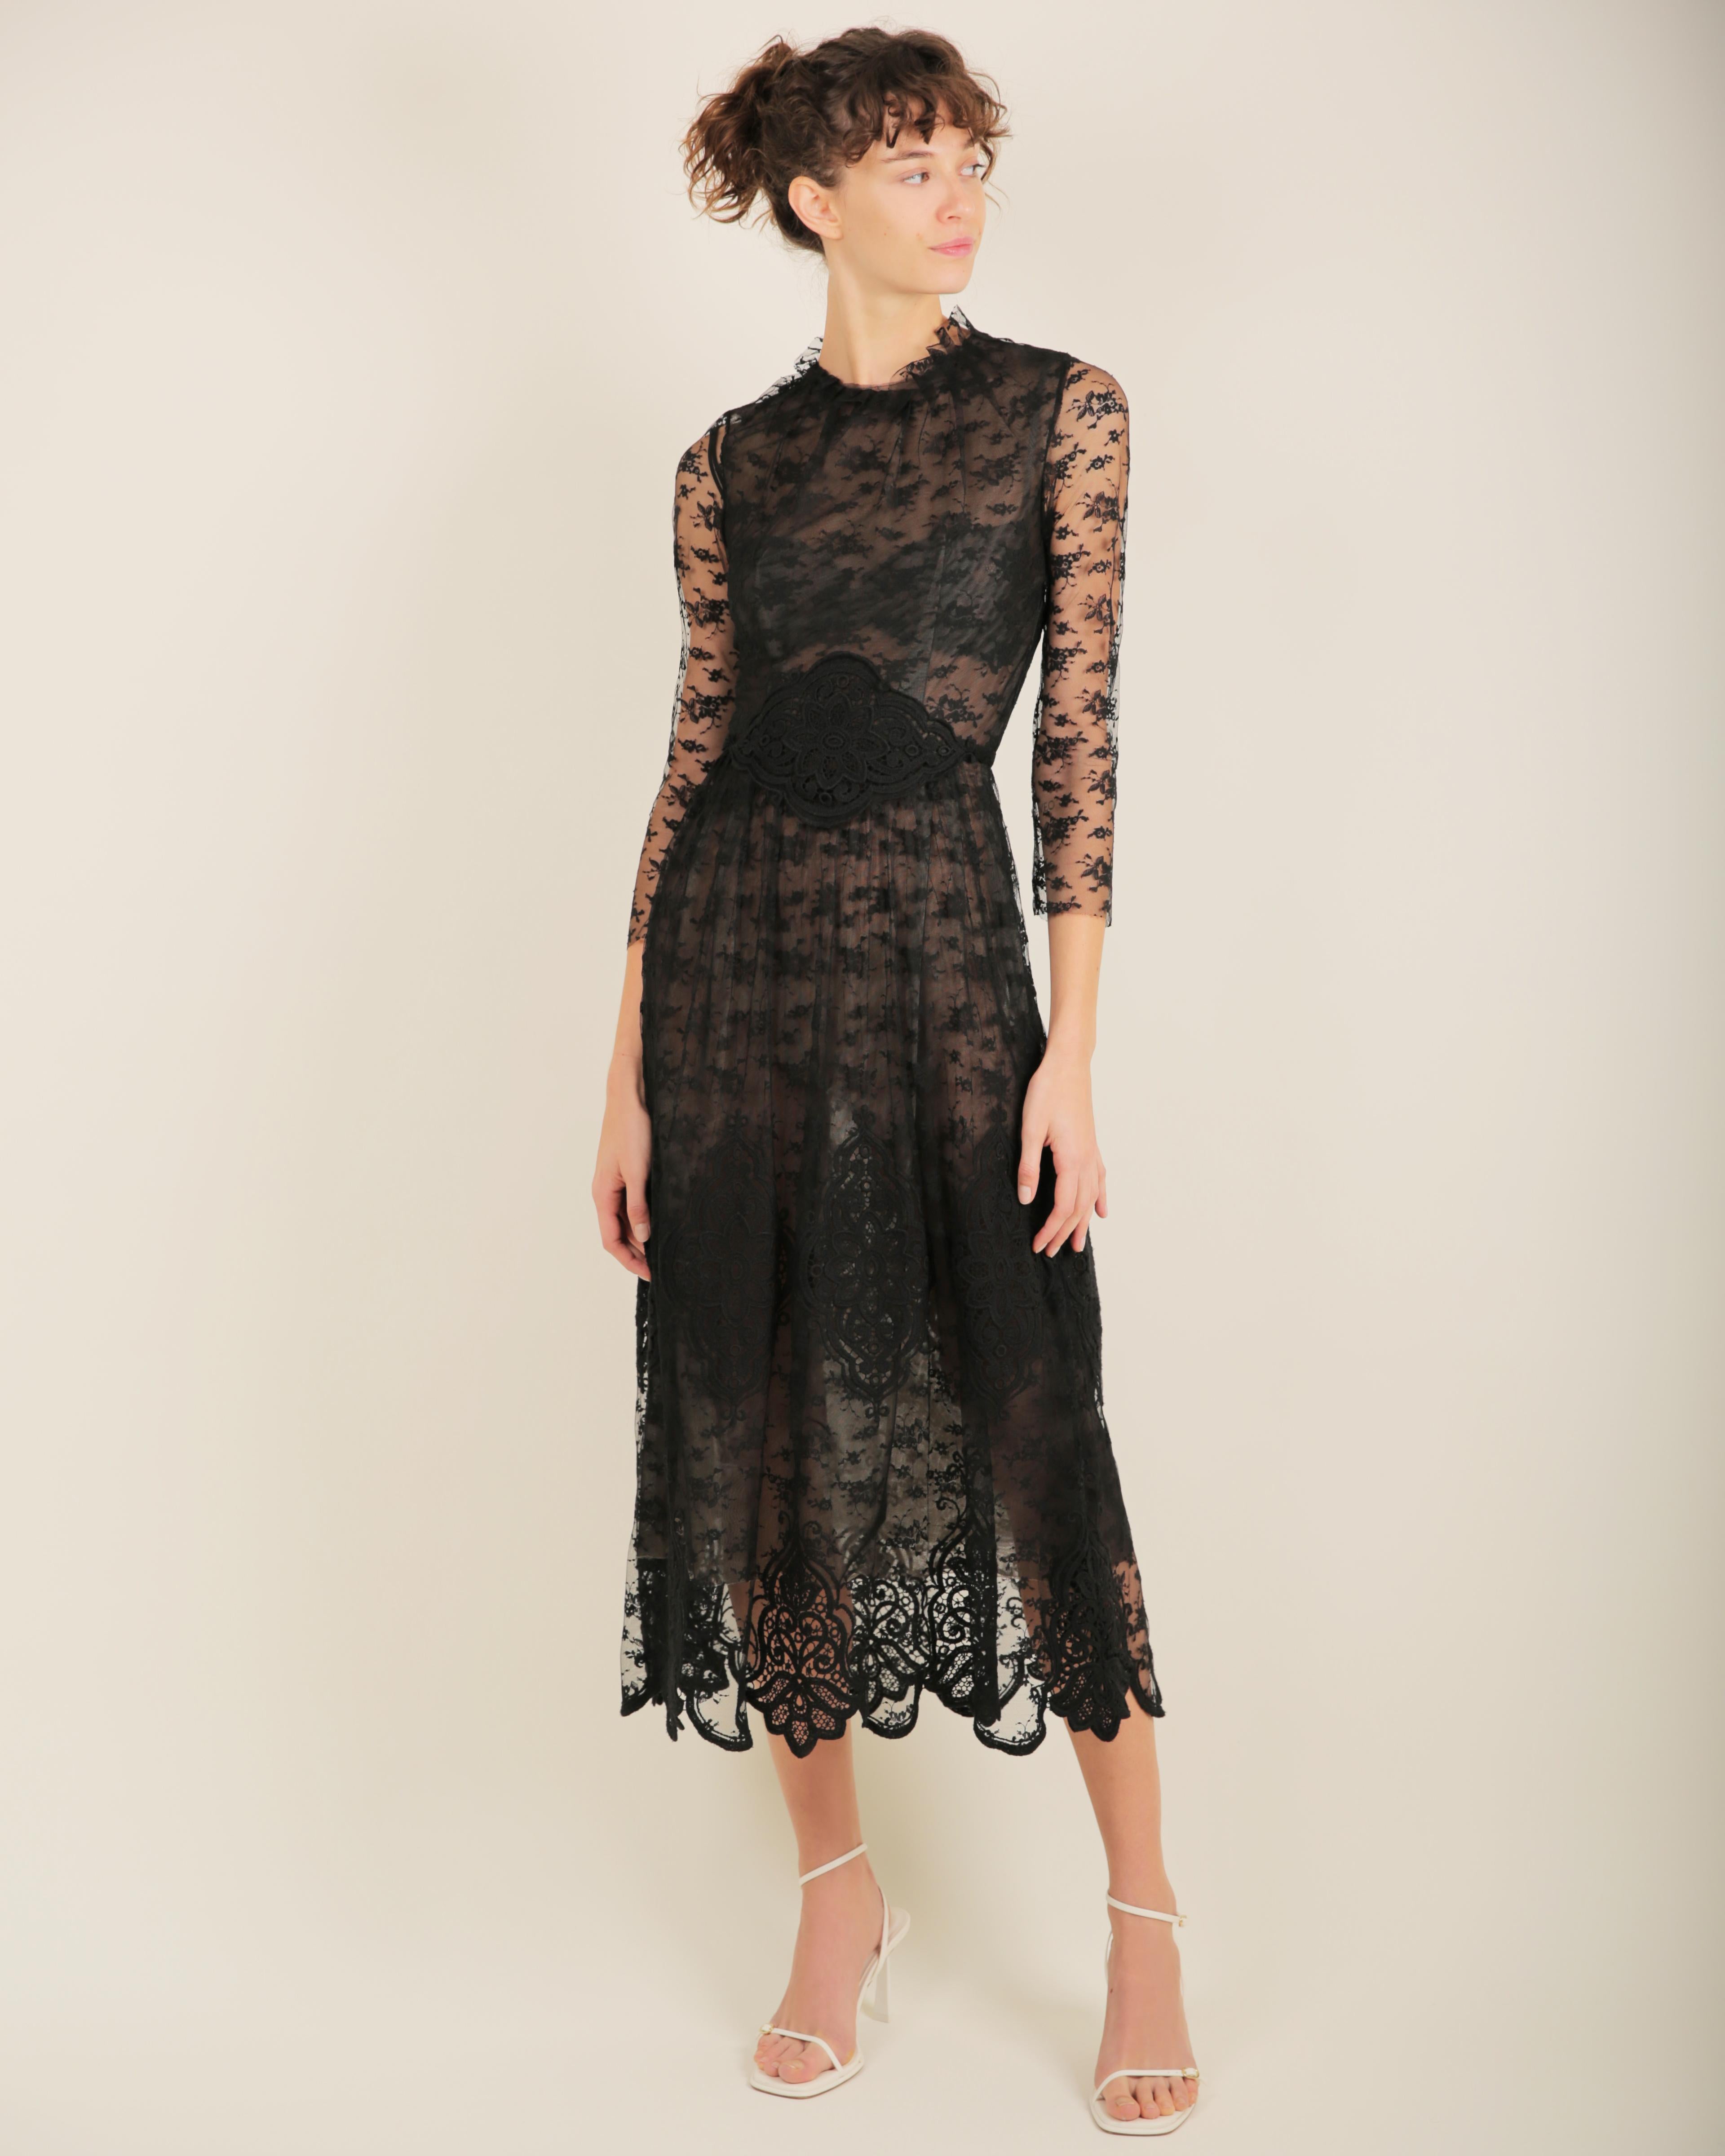 LOVE LALI Vintage

Louisa Beccaria 
Black lace semi sheer dress
Composed of three layers - one layer of nude tulle and one layer of black tulle which is overlayed by a layer of floral black lace inserted with black crochet
Tie waist that ties at the